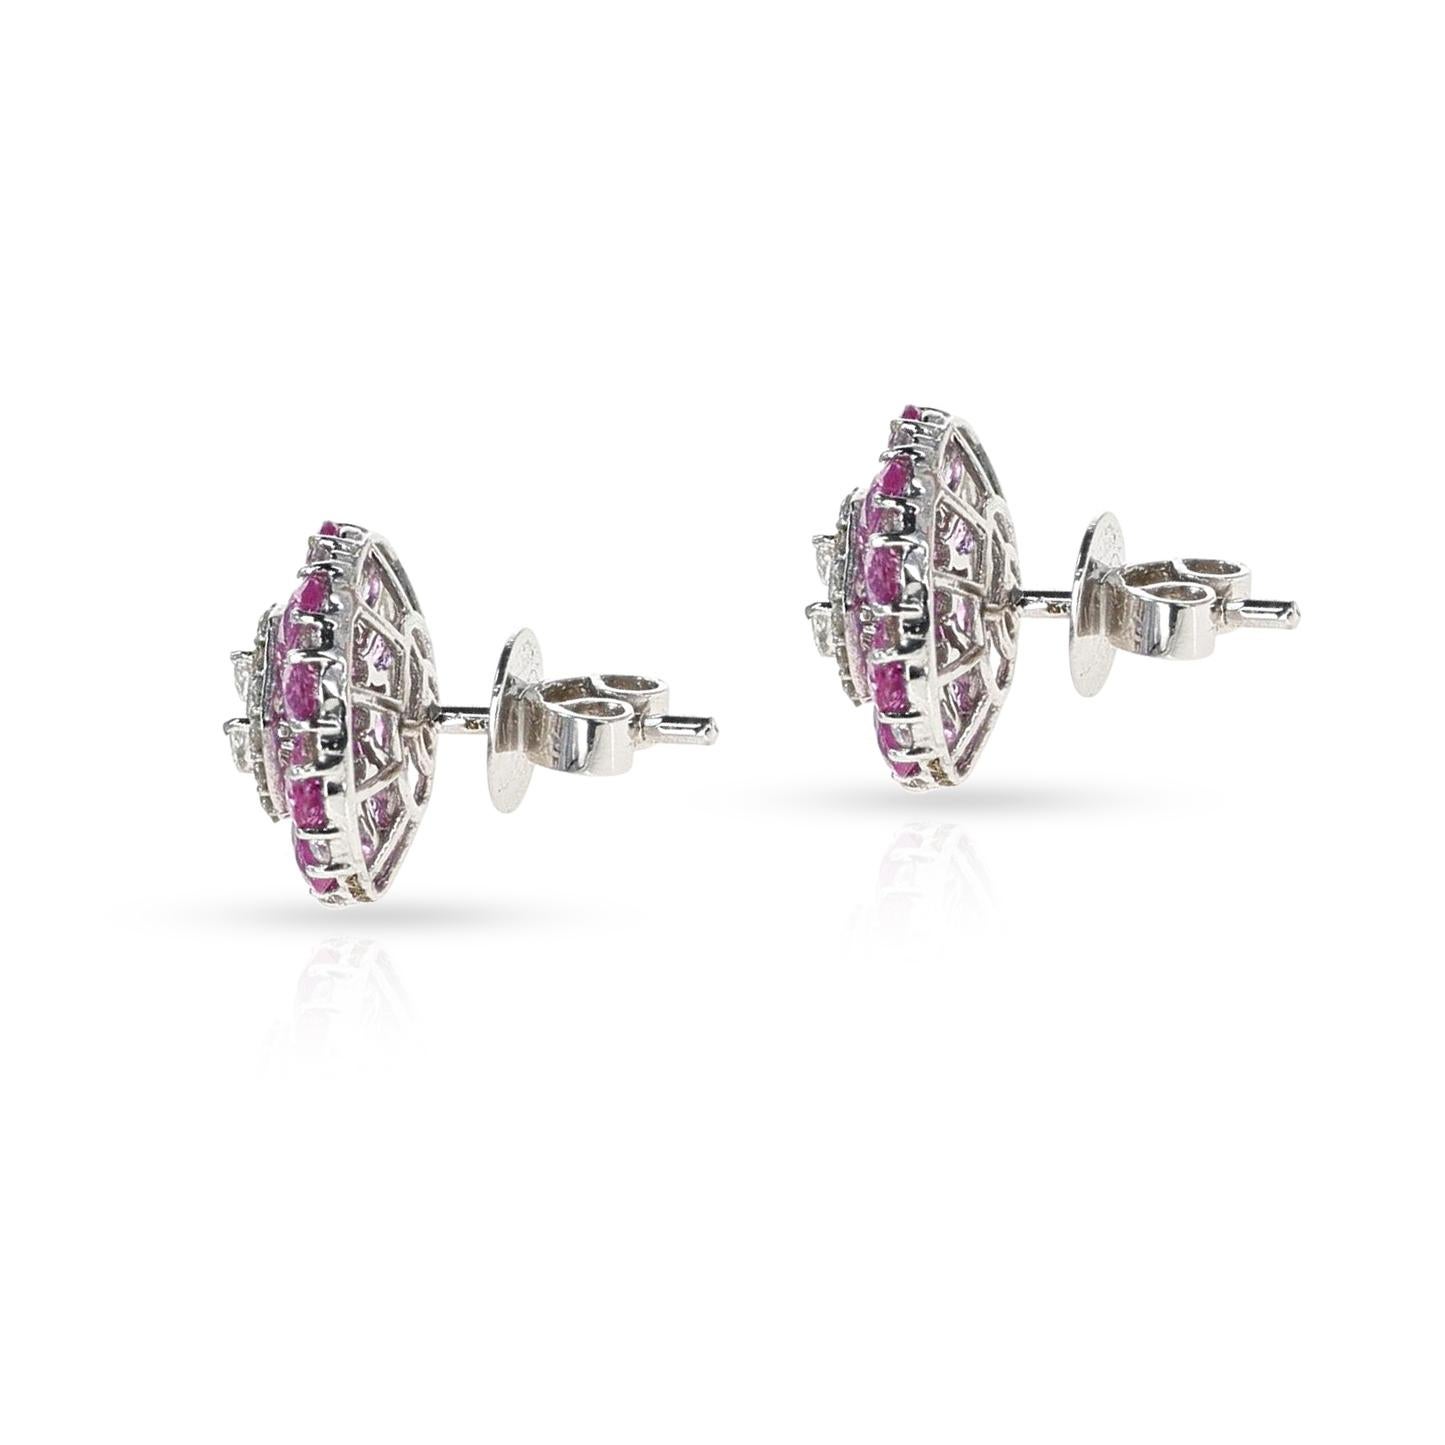 A classic pair of earrings set with Oval Pink Sapphires and Diamonds. The diamonds weigh 0.78 carats and the pink sapphires weigh 4.33 carats. Made in 18k White Gold. The total weight of the earrings is 6.47 grams. The dimensions are 0.59